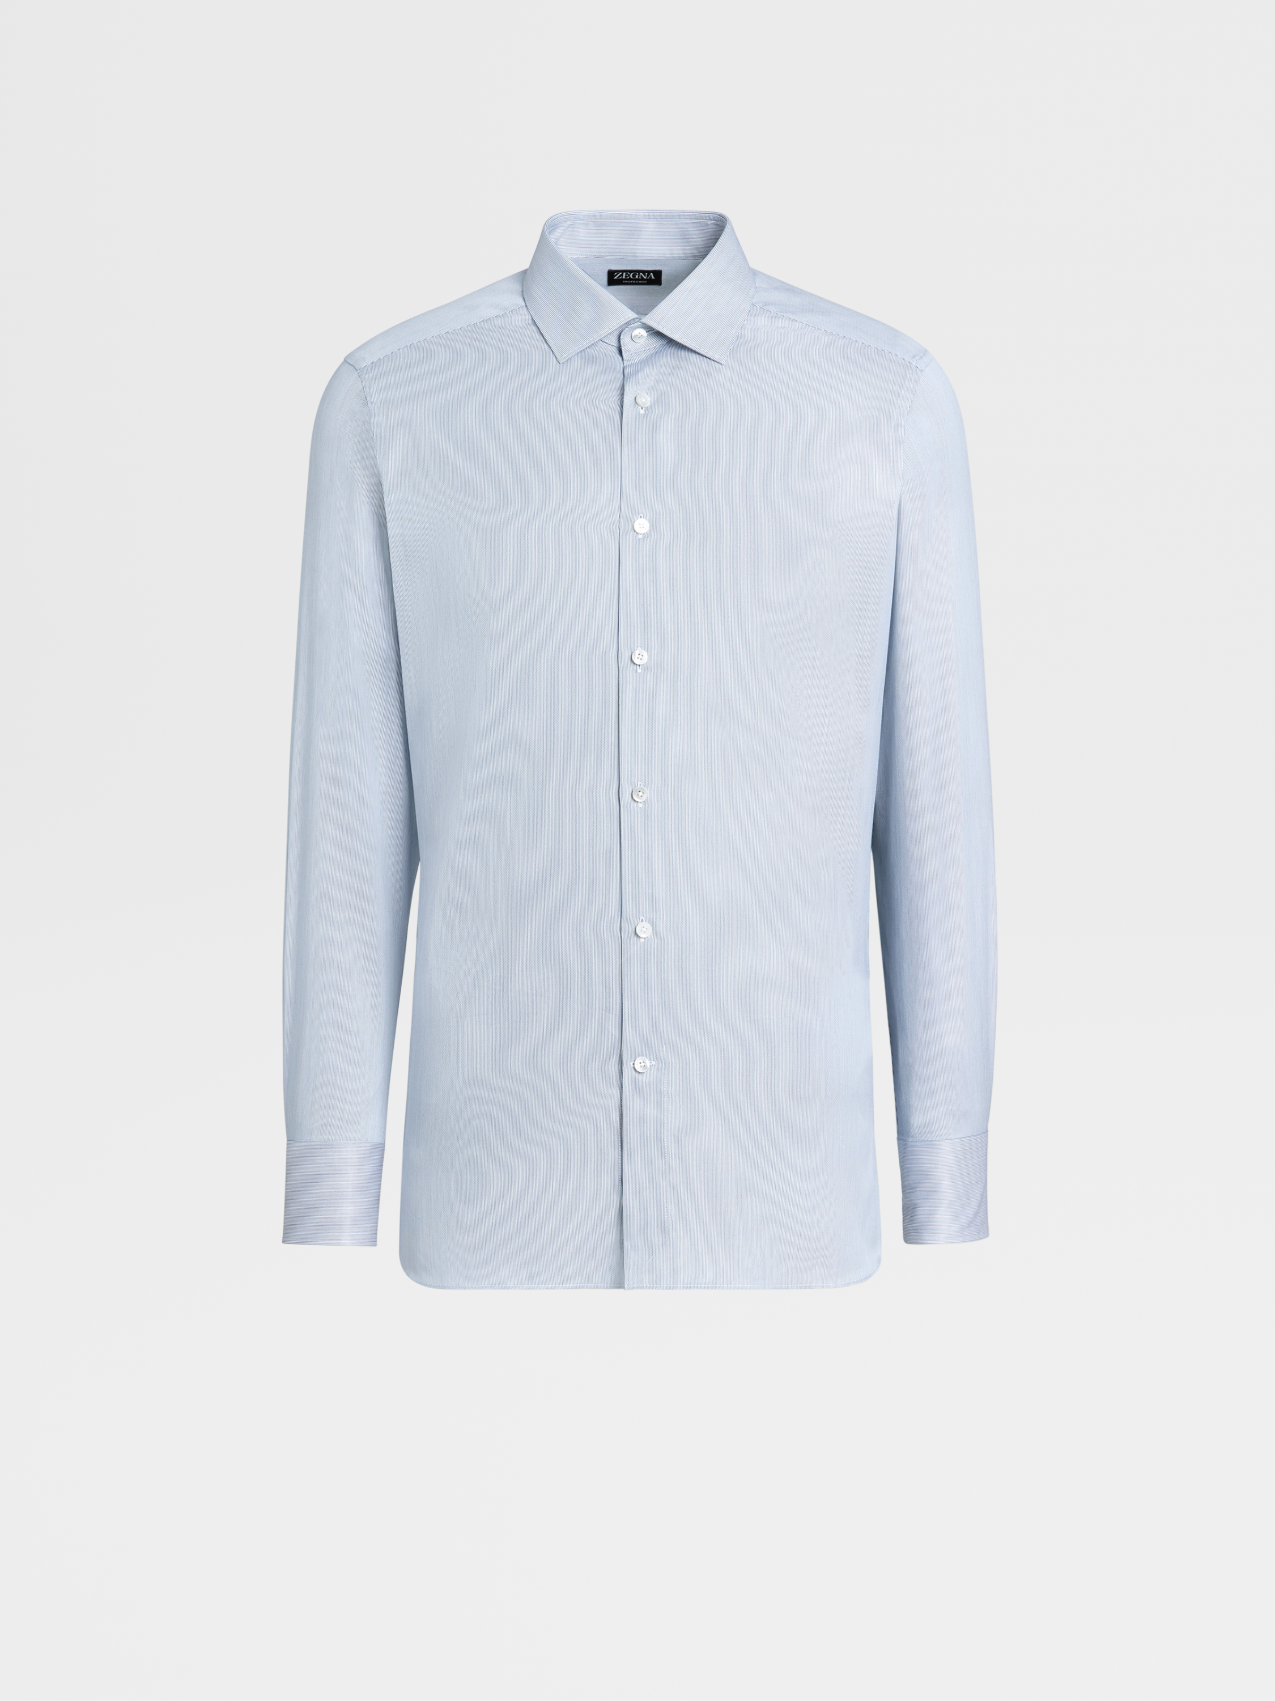 Navy Blue and White Micro-striped Trofeo™ 600 Cotton and Silk Long-sleeve Tailoring Shirt